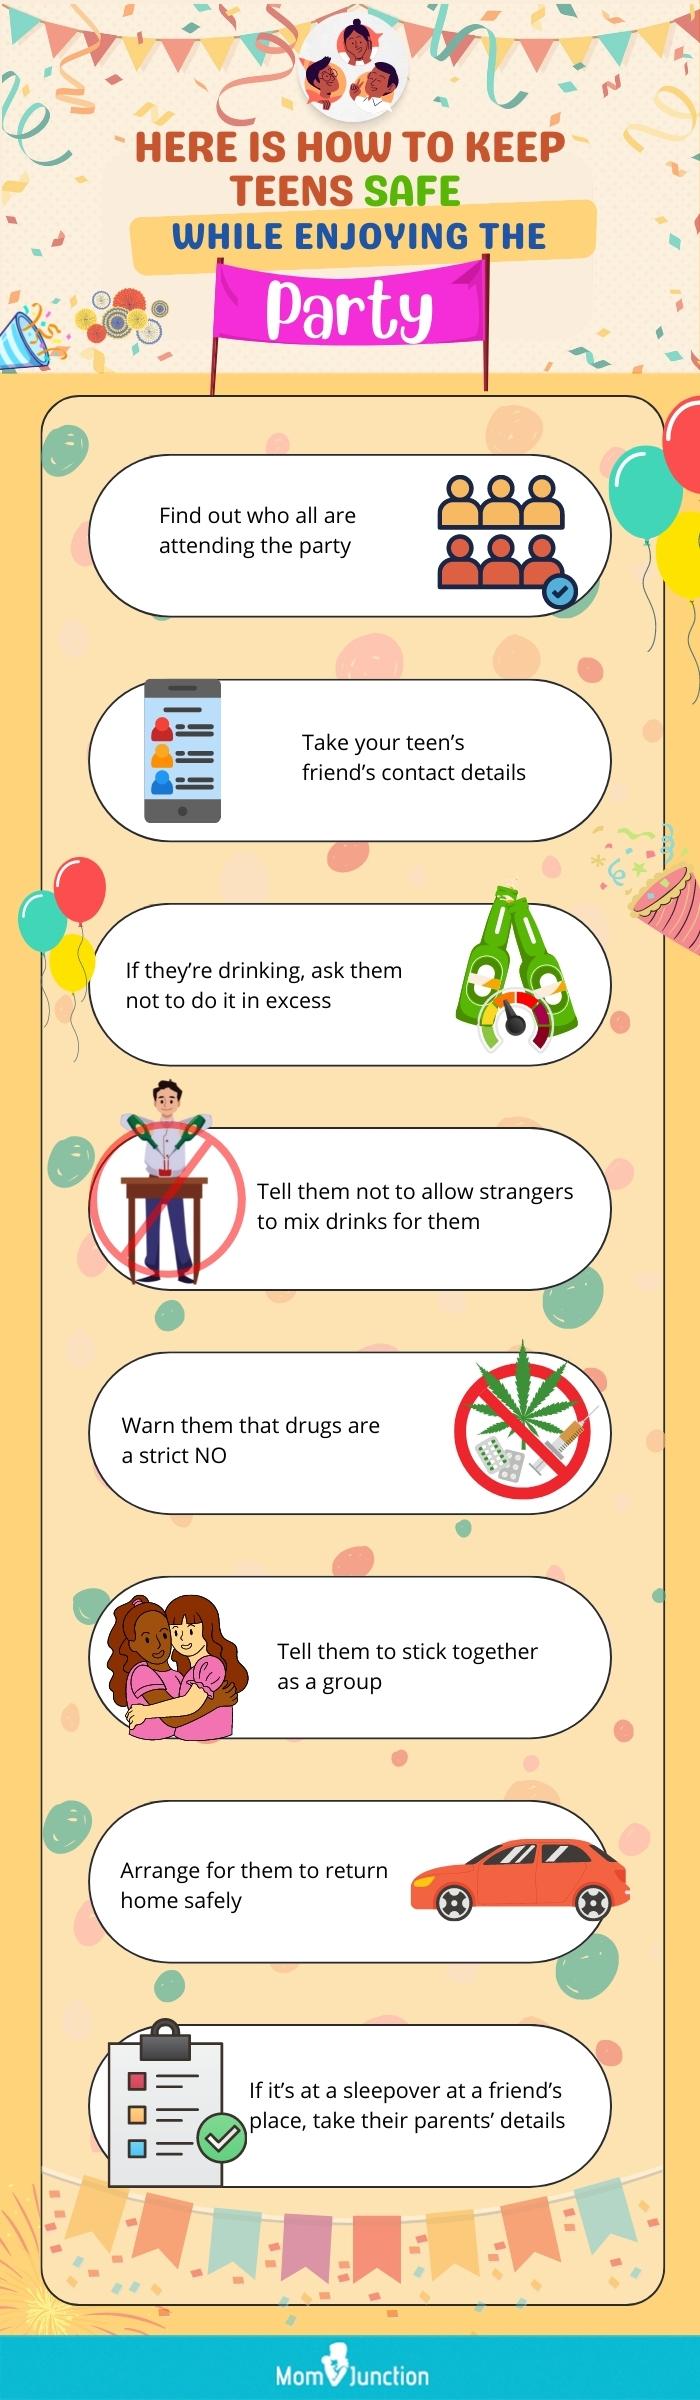 here is how to keep teens safe while enjoying the party (infographic)